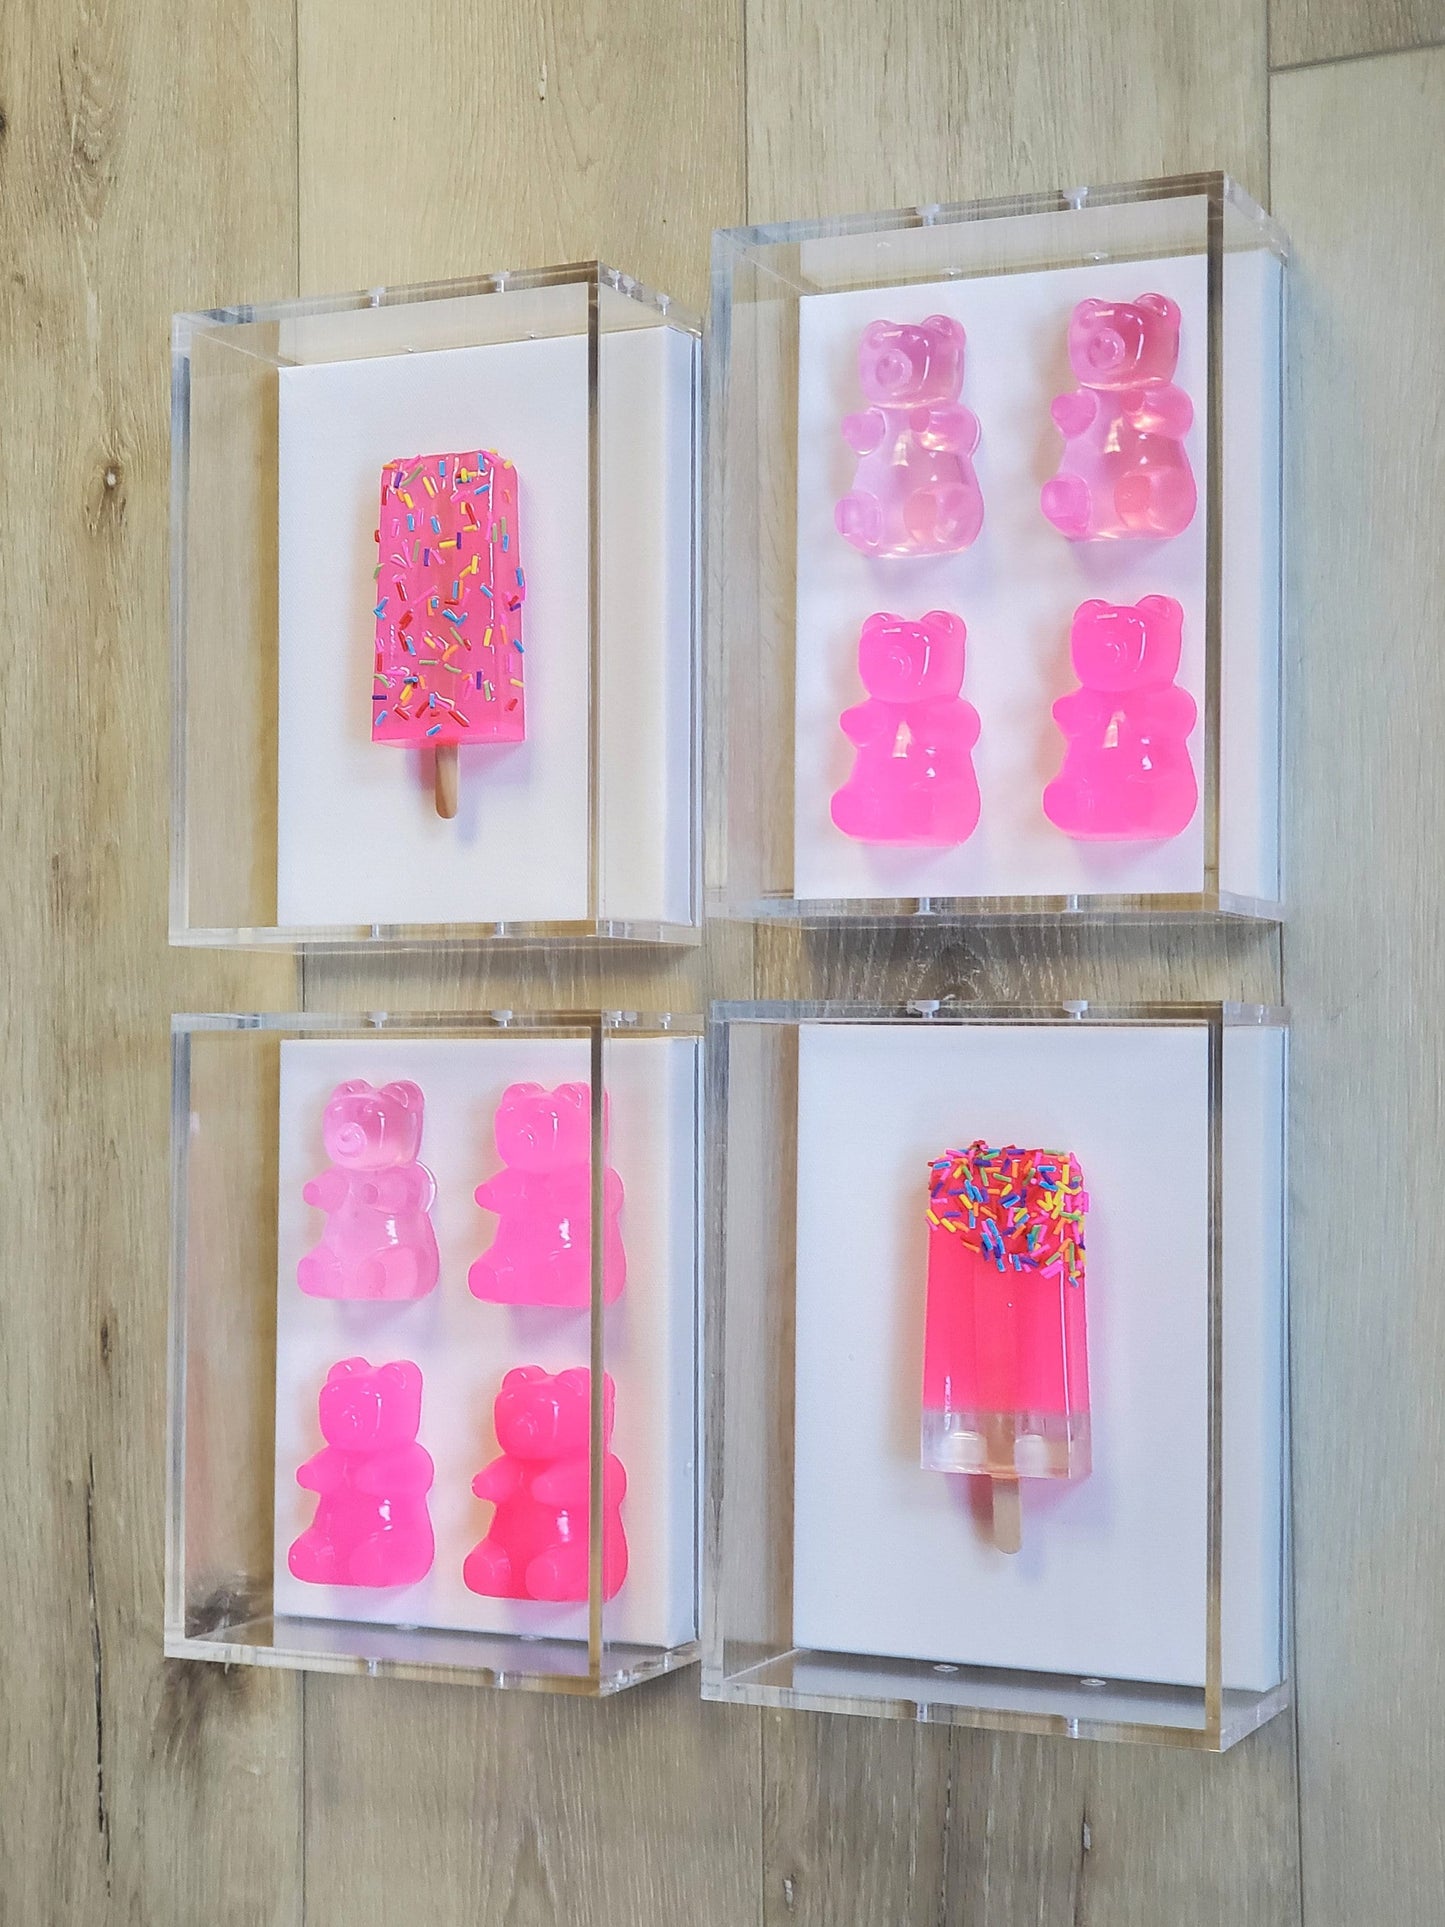 Pop Art, Visual 3D Art, Set of 9 Boxes,Customize Luxury Sculpture Wall Art, Popsicle, Bears, Donuts.